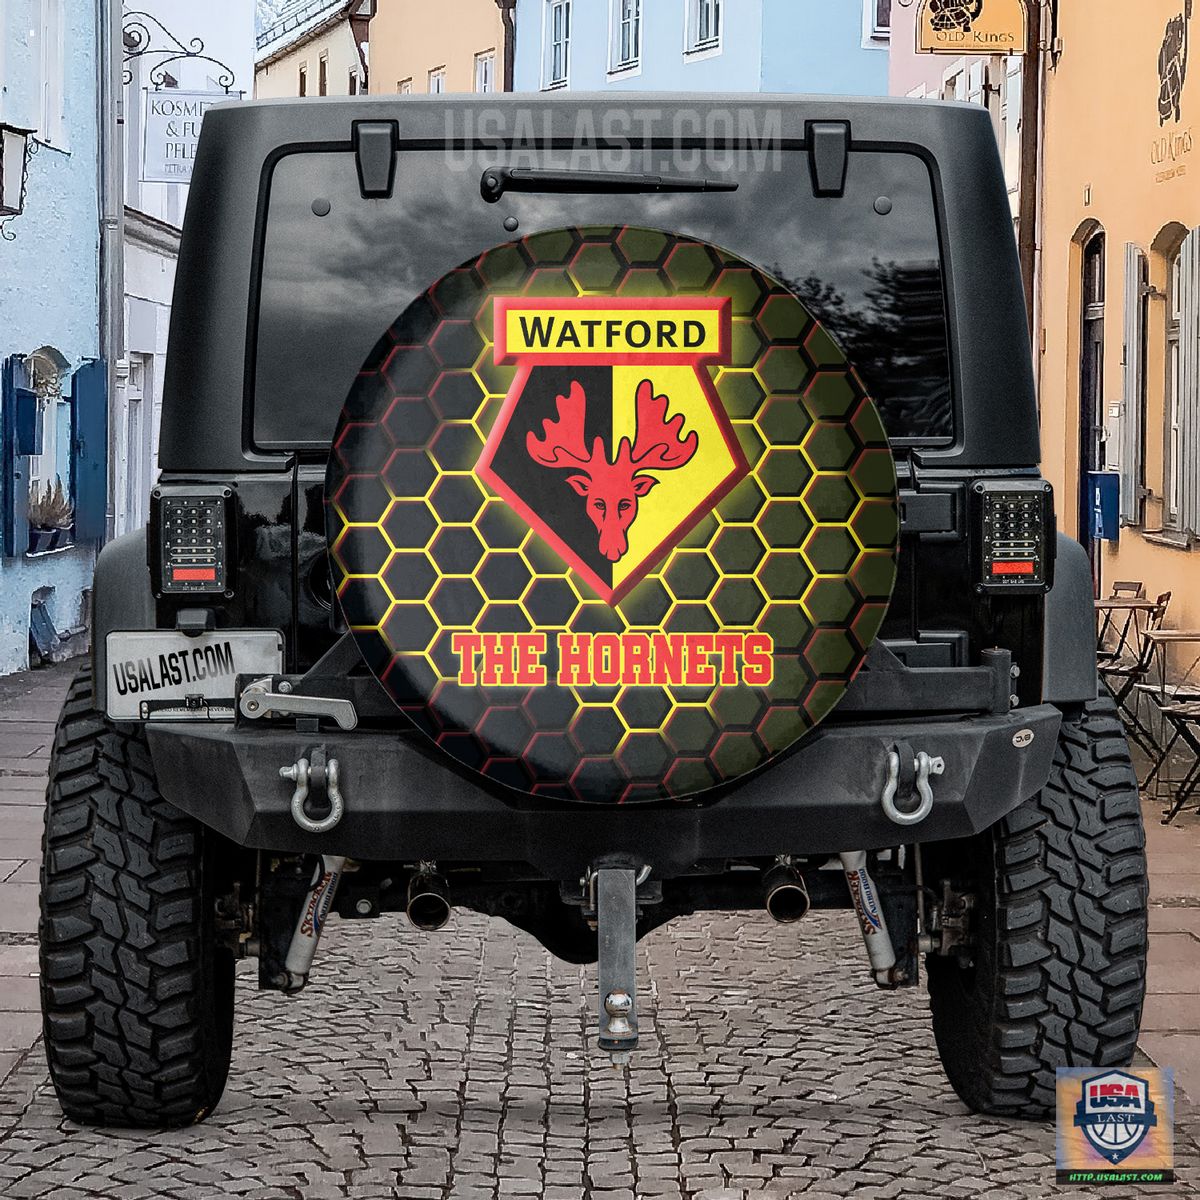 AMAZING Watford FC Spare Tire Cover